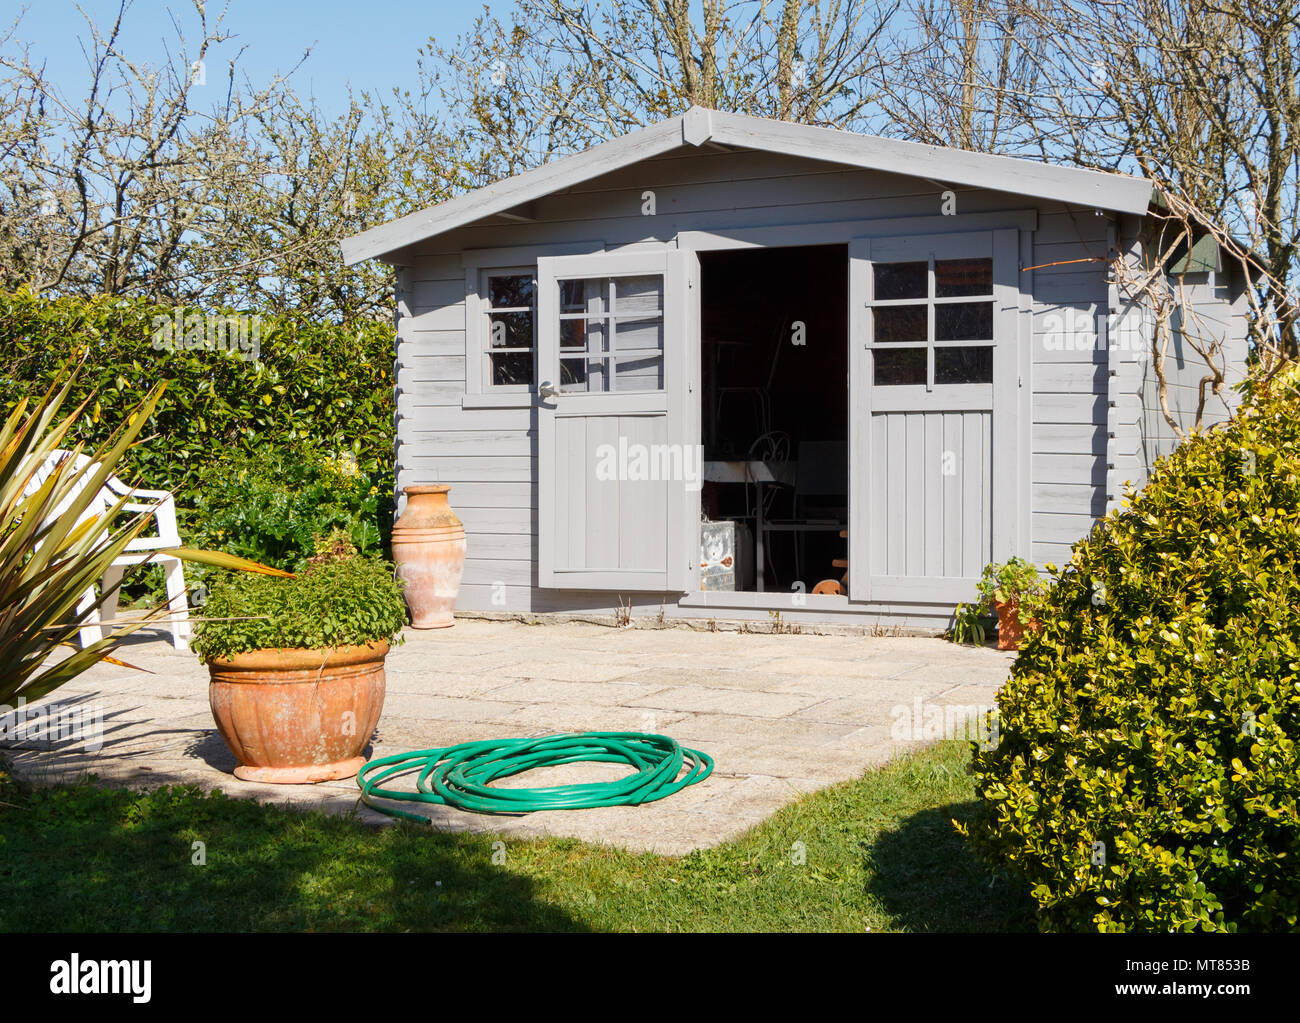 Shed with terrace in a garden during spring Stock Photo